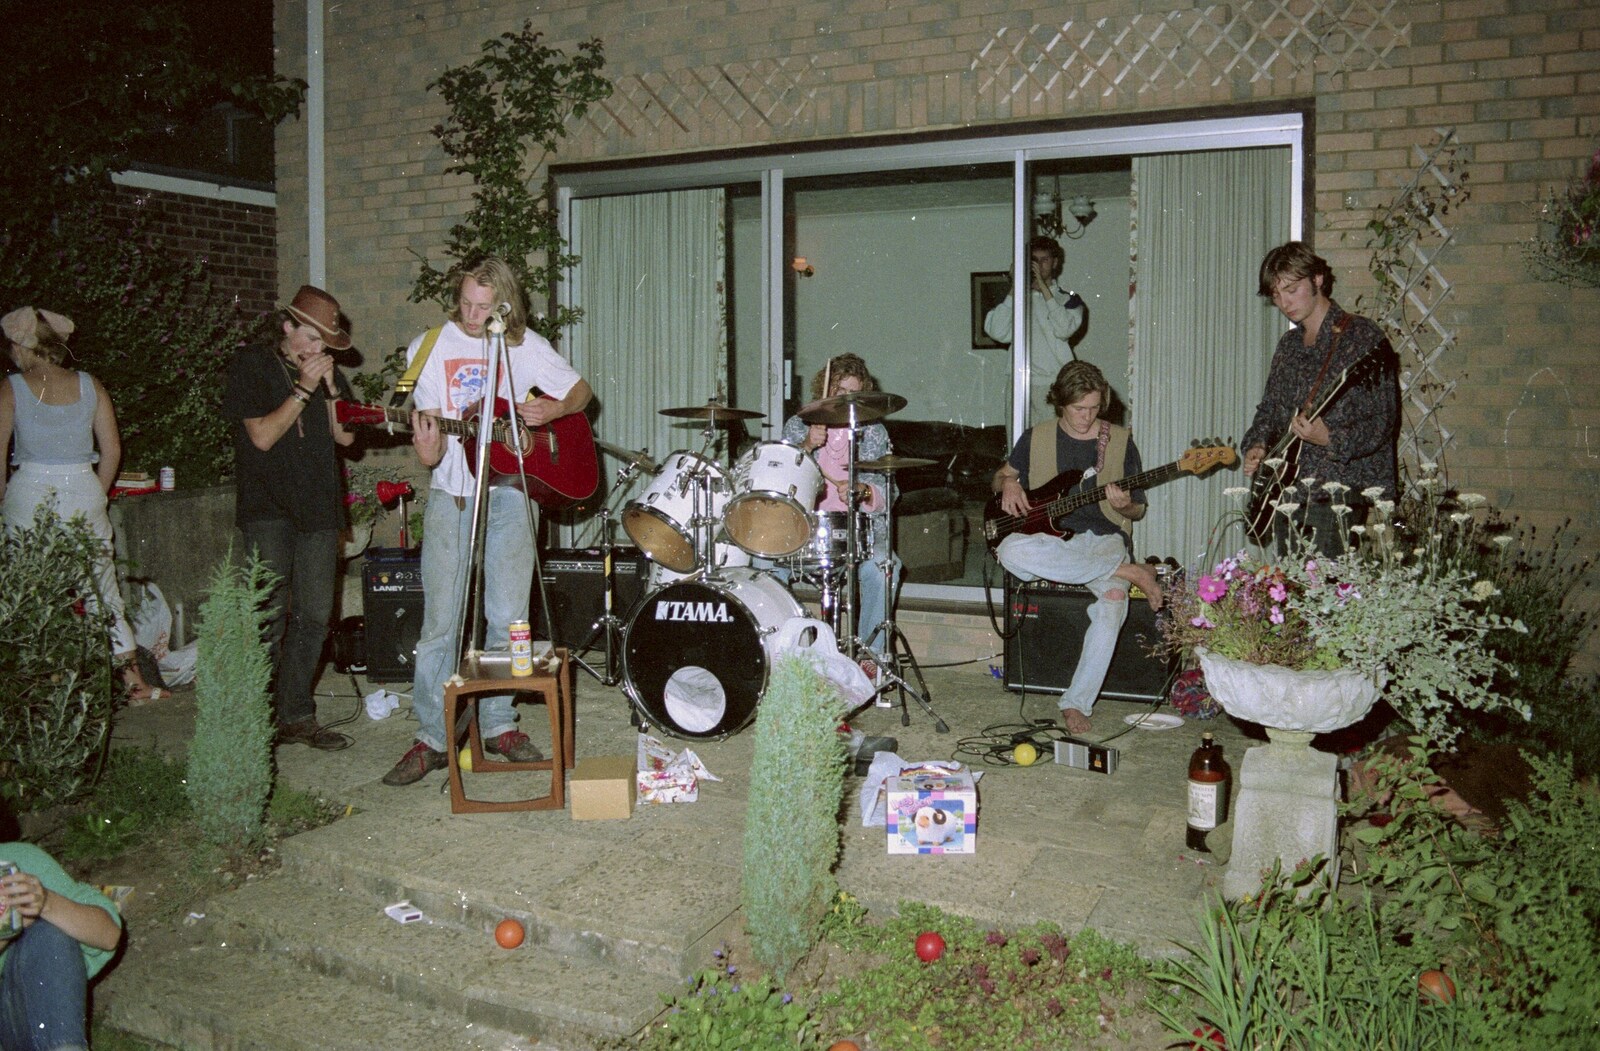 Chris and Phil's Party, Hordle, Hampshire - 6th September 1989: Chris (on bass) and his band